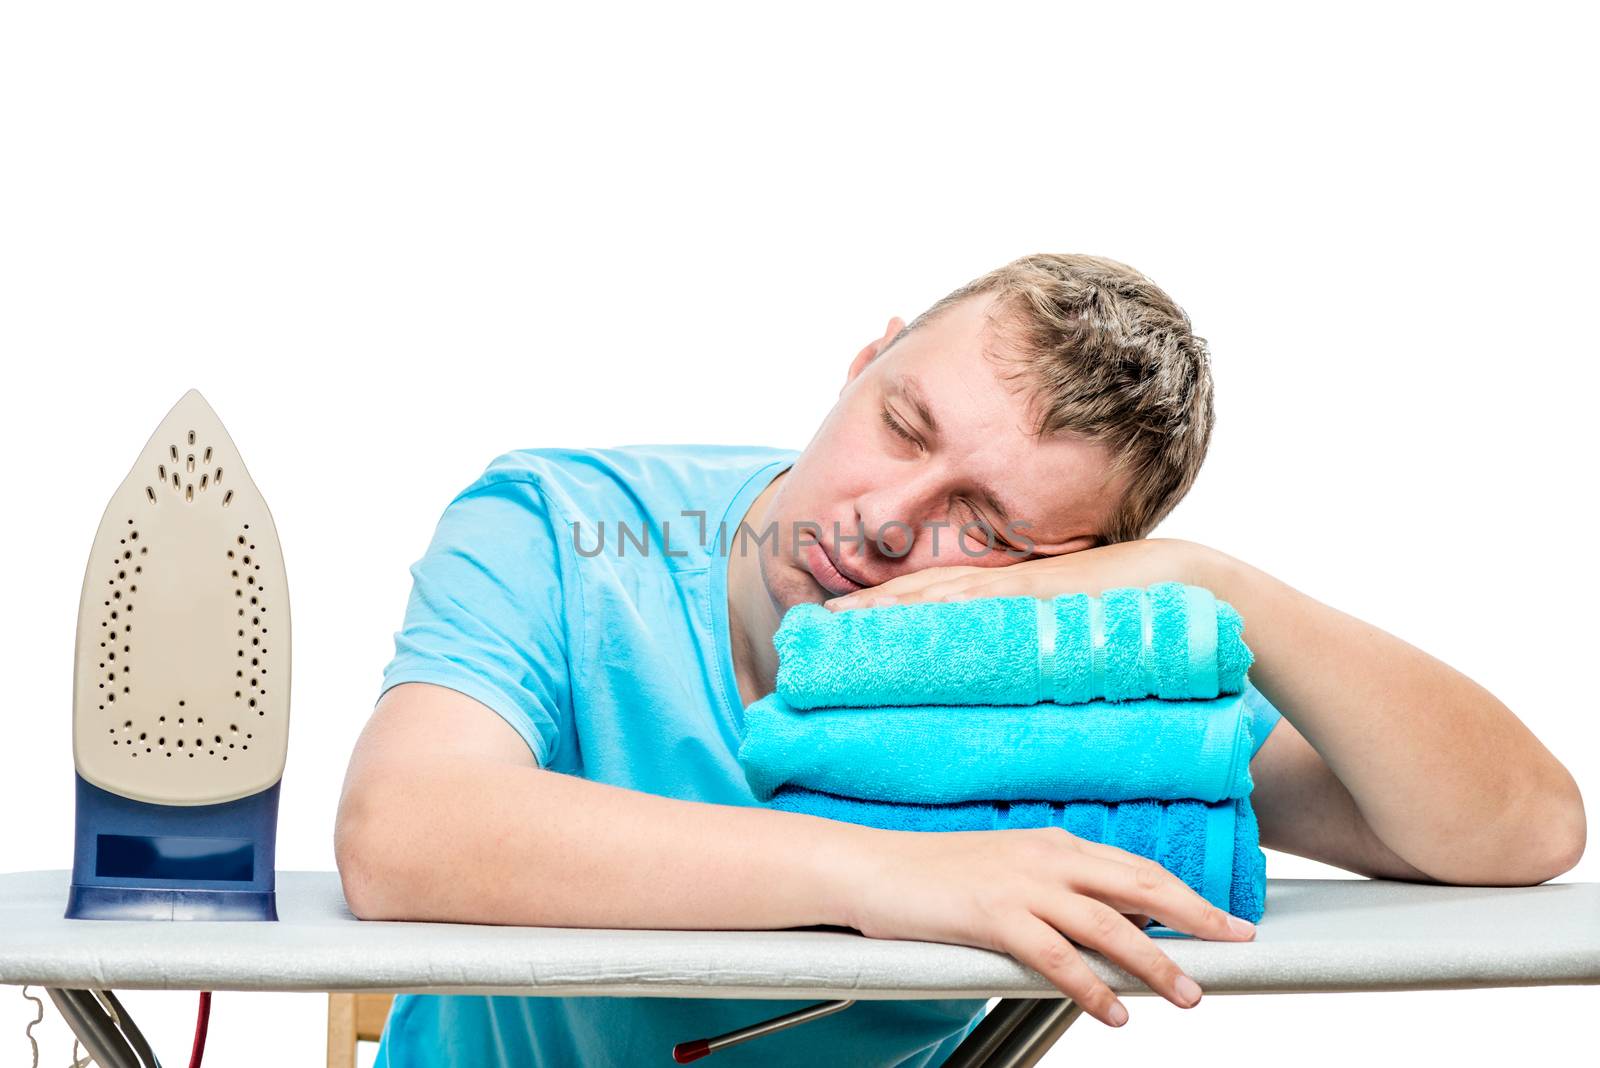 a tired man stroked the towels and fell asleep on the ironing board, his head lying on the towel